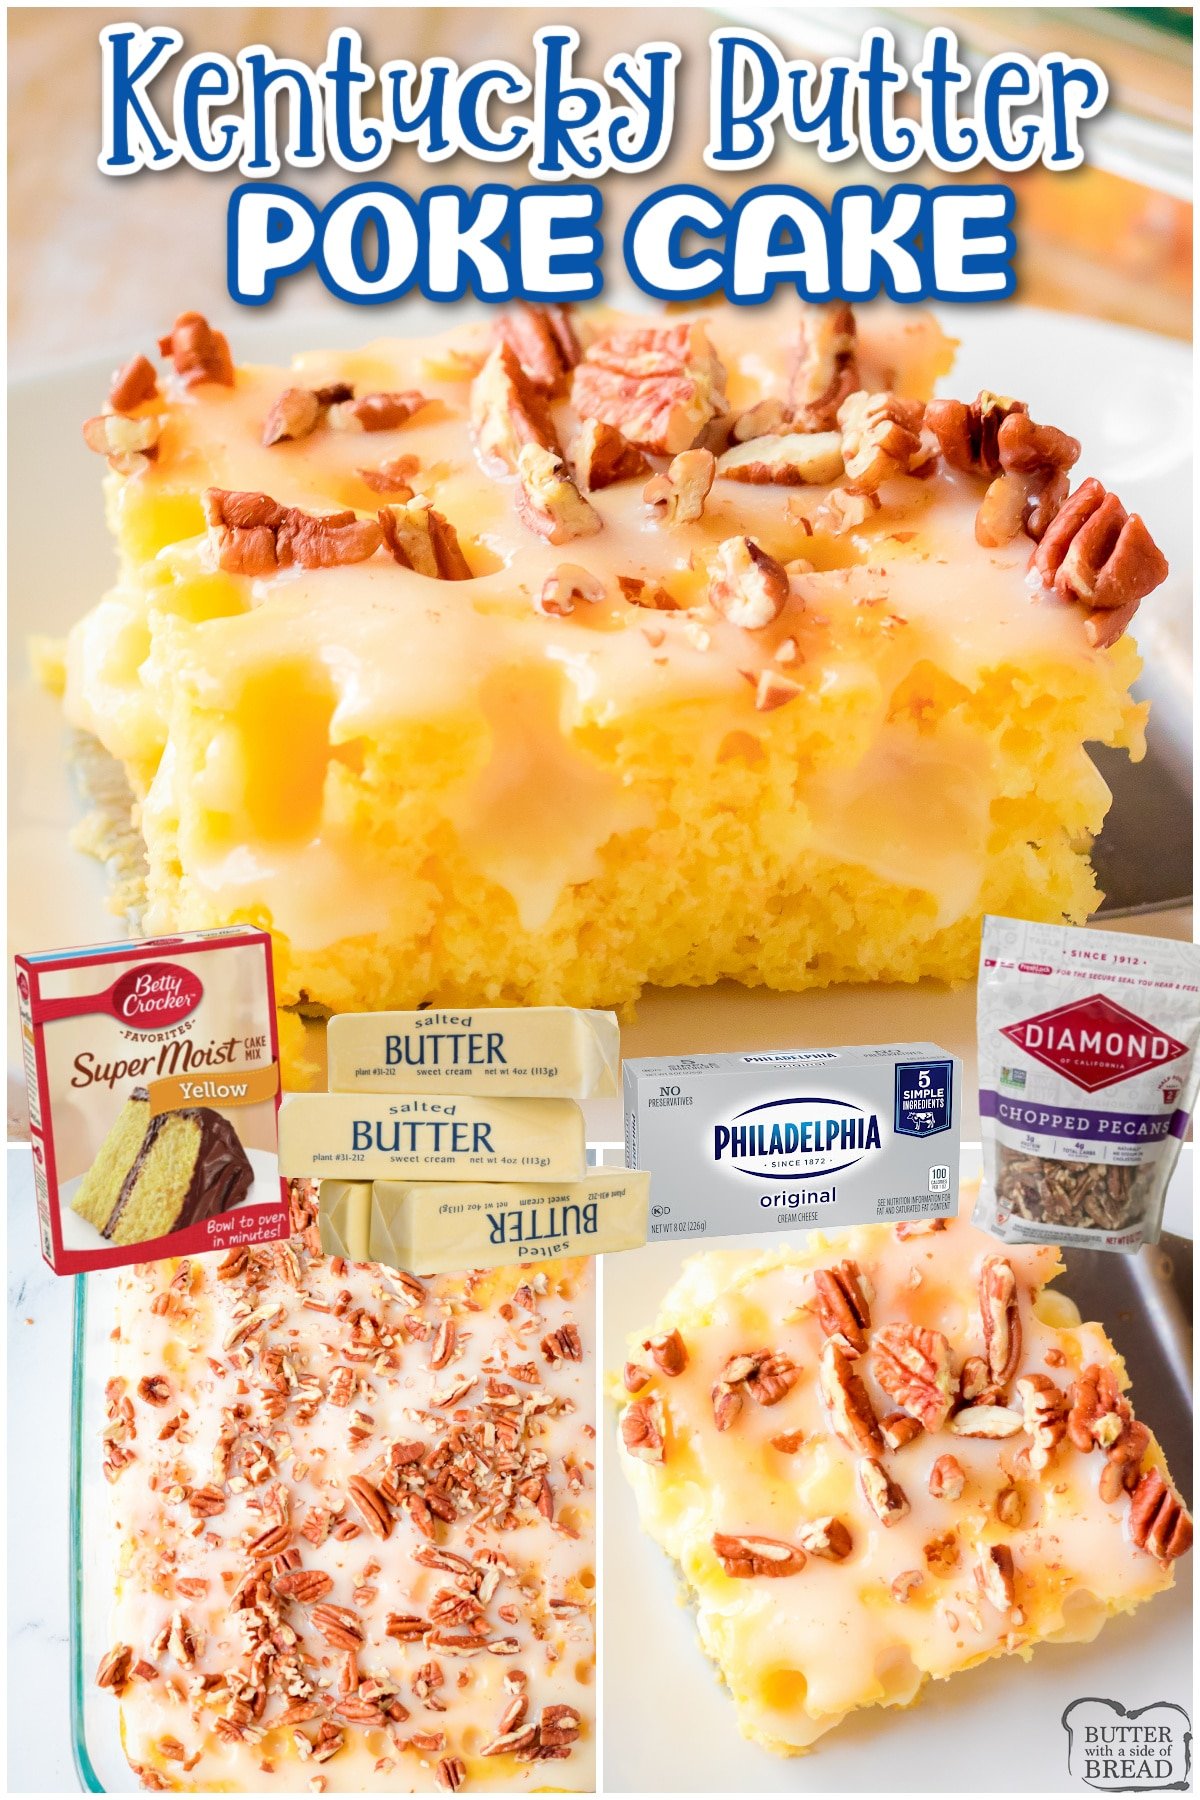 Kentucky Butter Poke Cake is a delightful twist on a classic butter pecan pound cake! Buttermilk & cream cheese star in this rich, flavorful butter poke cake topped with toasted pecans.